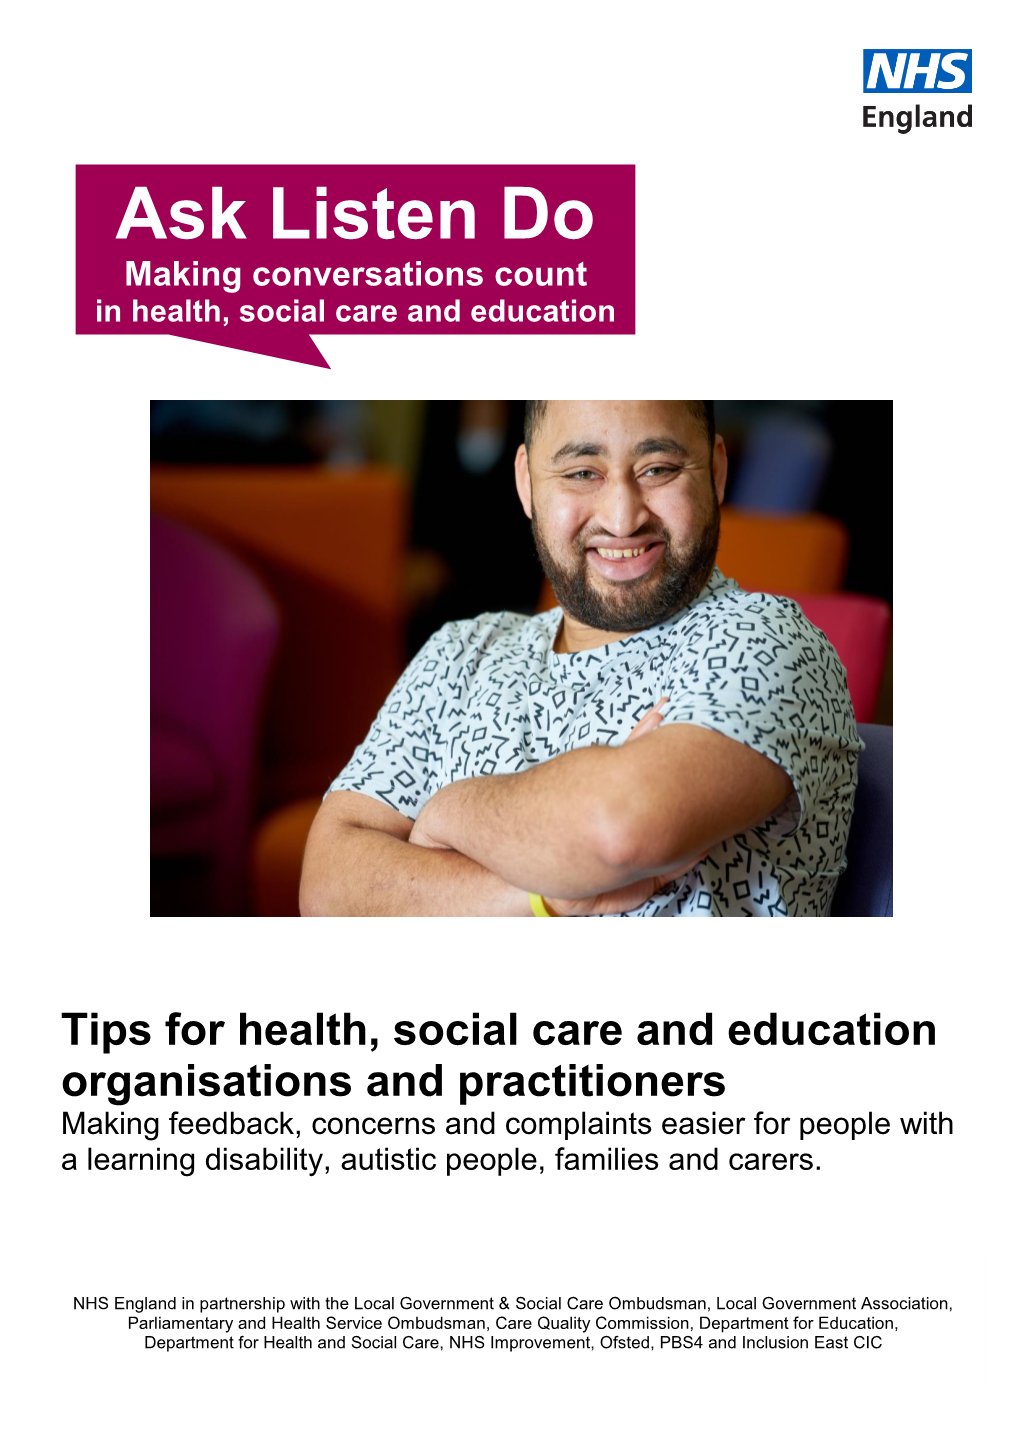 Ask Listen Do Making Conversations Count in Health, Social Care and Education